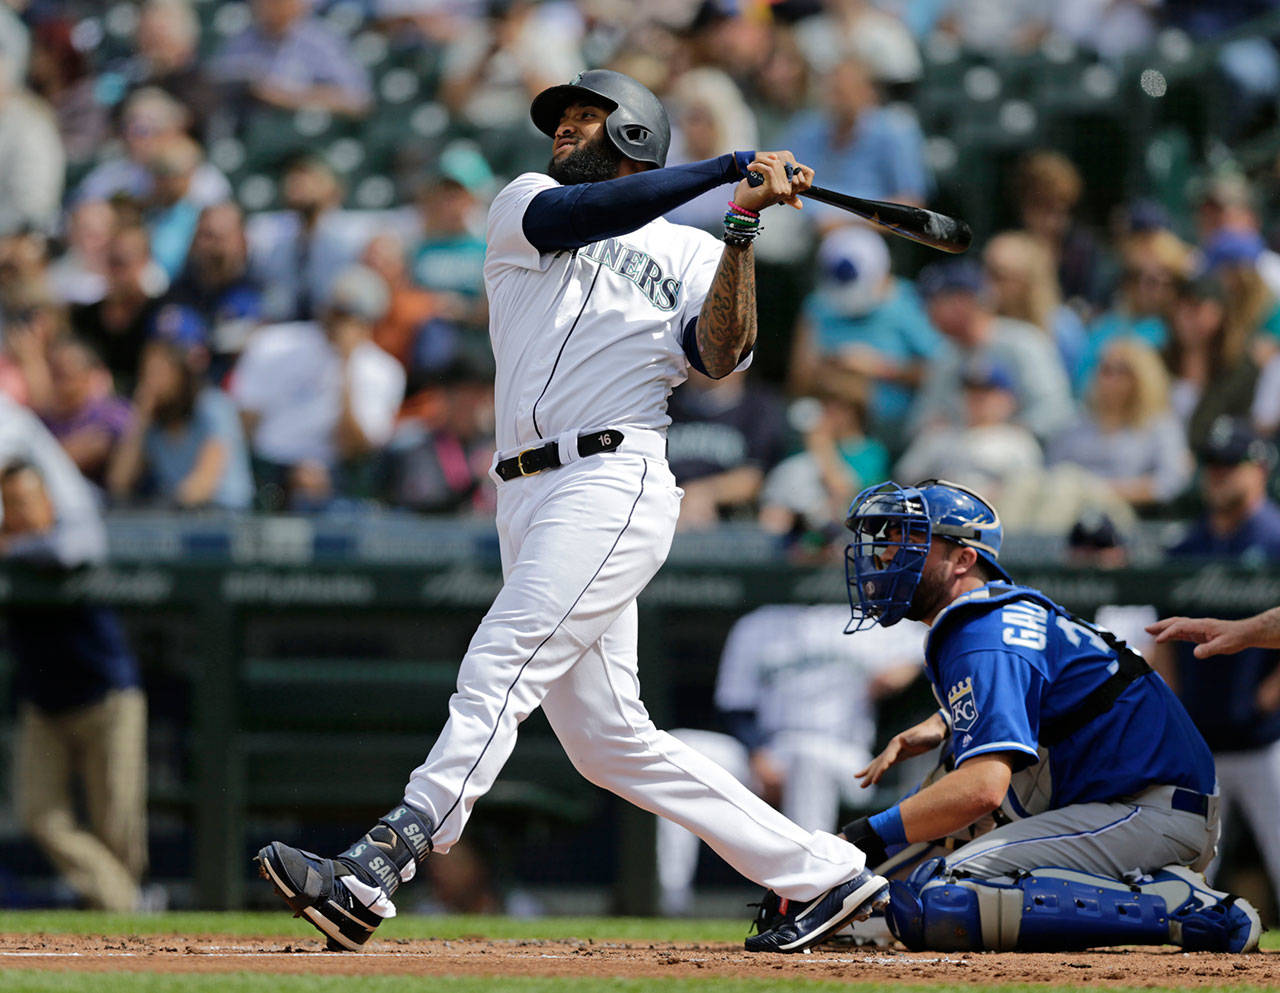 The Mariners’ Domingo Santana watches his three-run home run during the first inning of a game against the Royals on June 19, 2019, in Seattle. (AP Photo/John Froschauer)